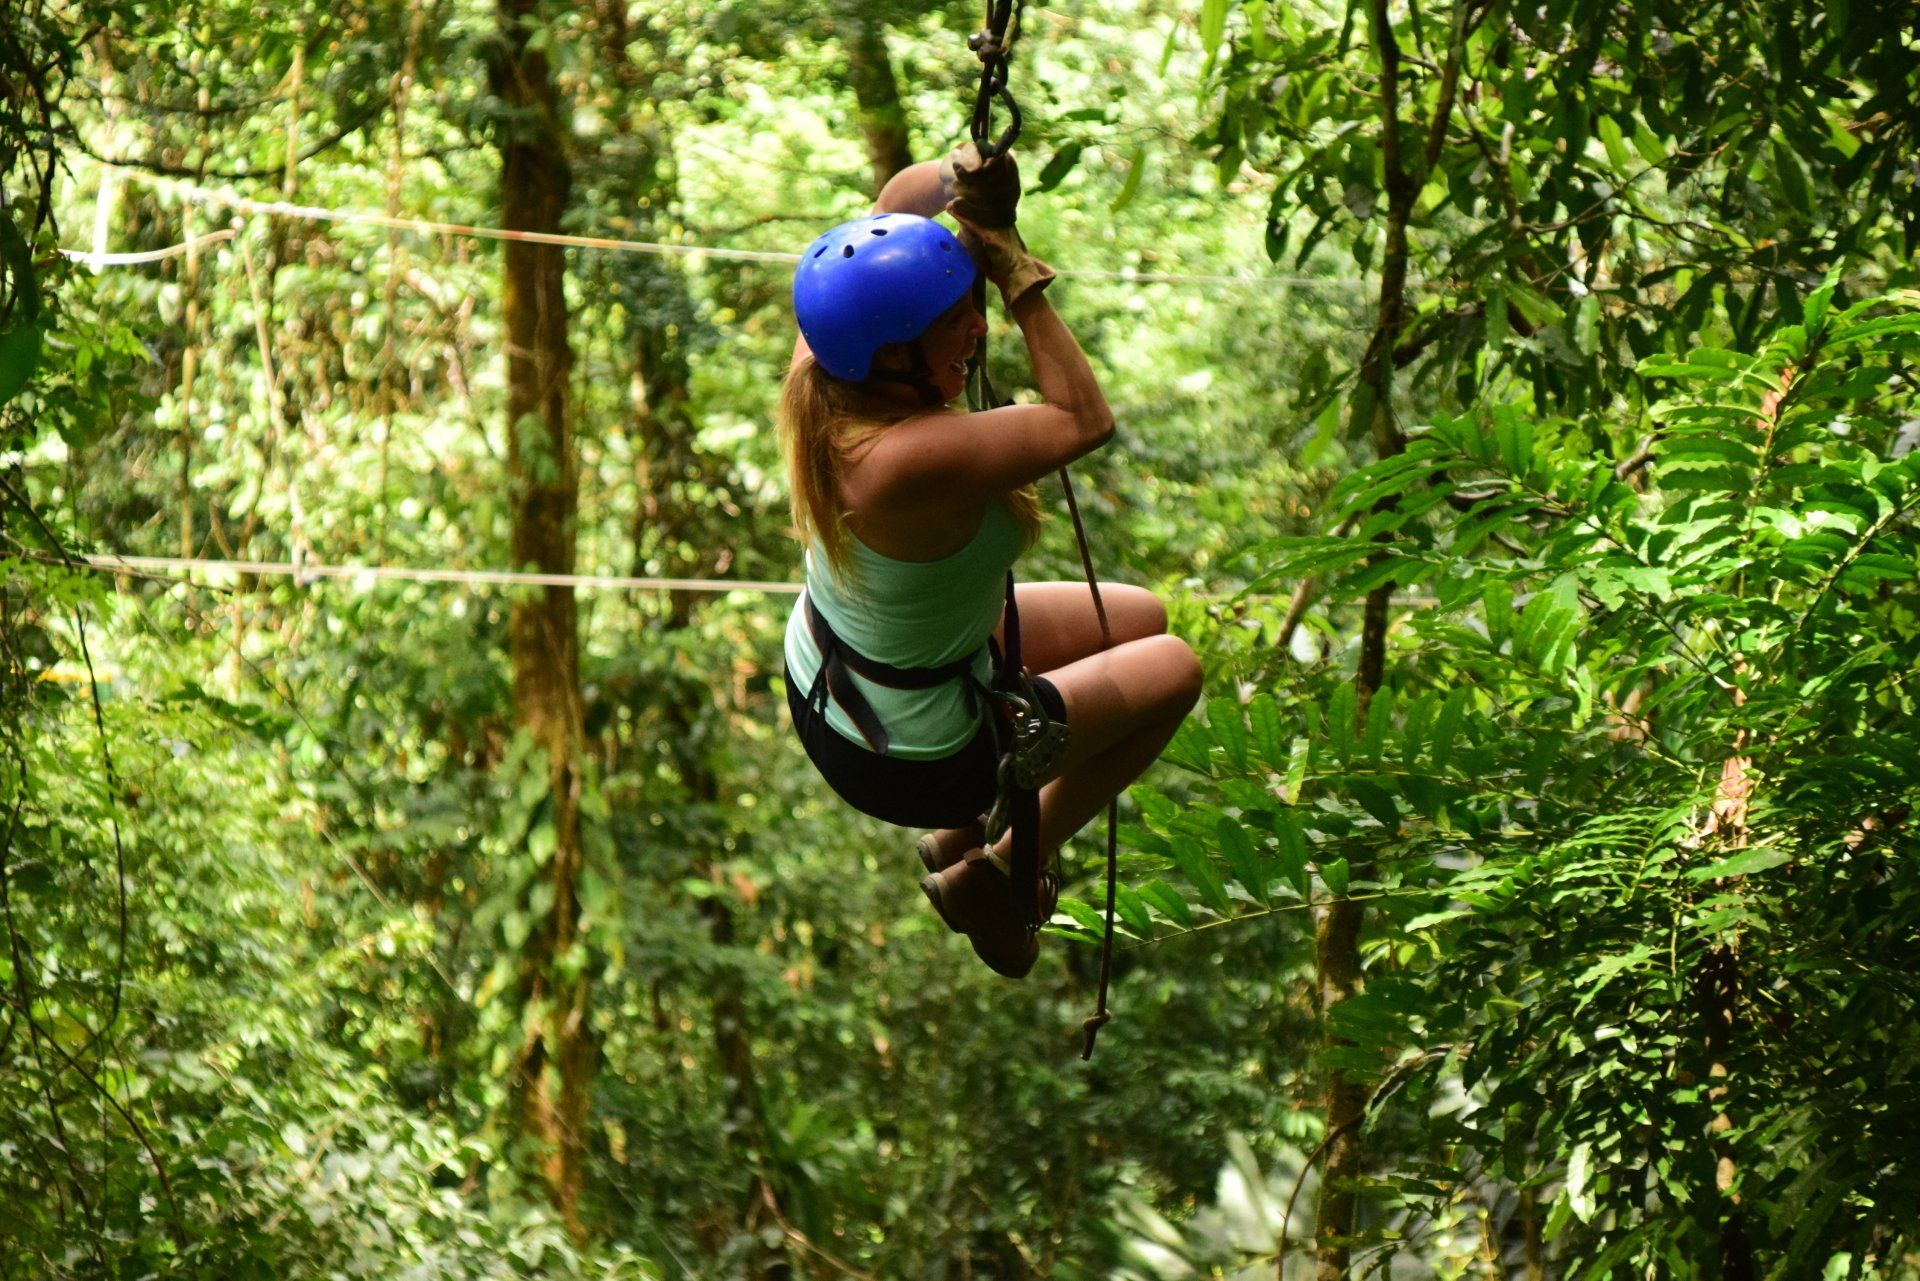 A woman is flying through the air on a zip line in the jungle.